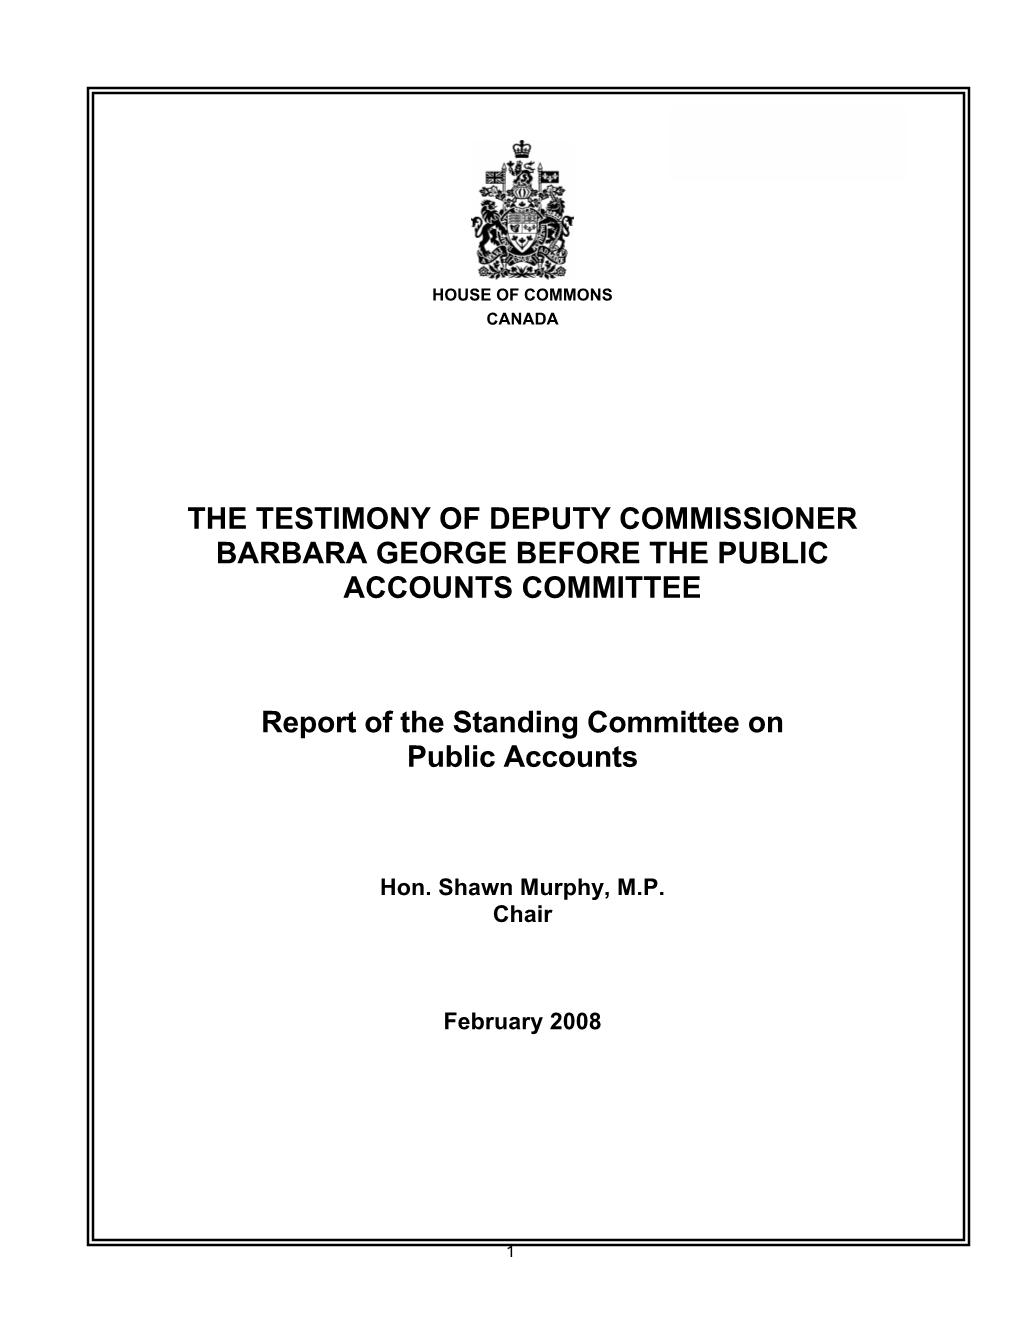 The Testimony of Deputy Commissioner Barbara George Before the Public Accounts Committee